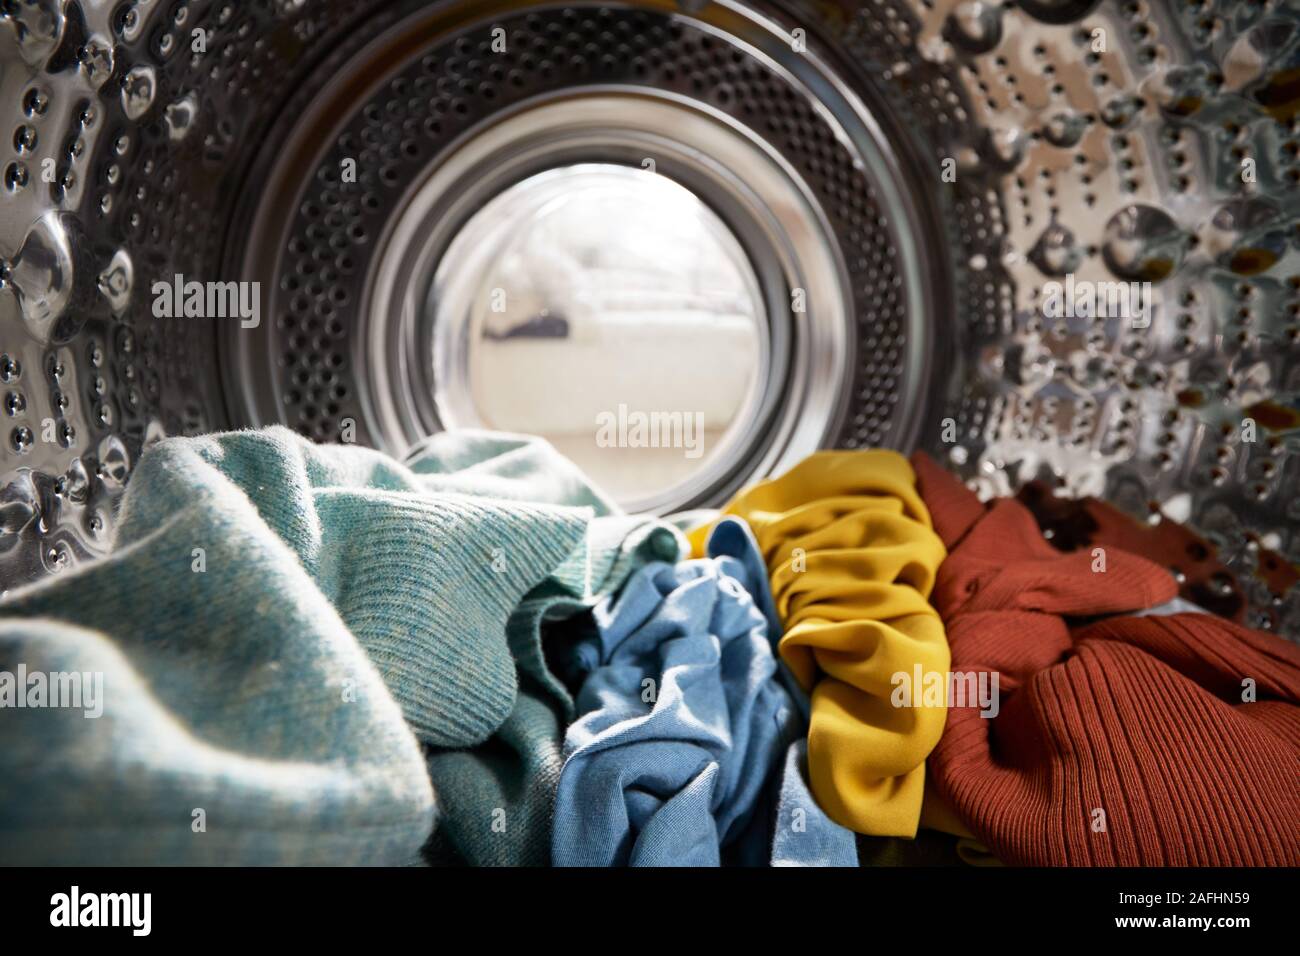 View Looking Out From Inside Washing Machine Filled With Laundry Stock Photo